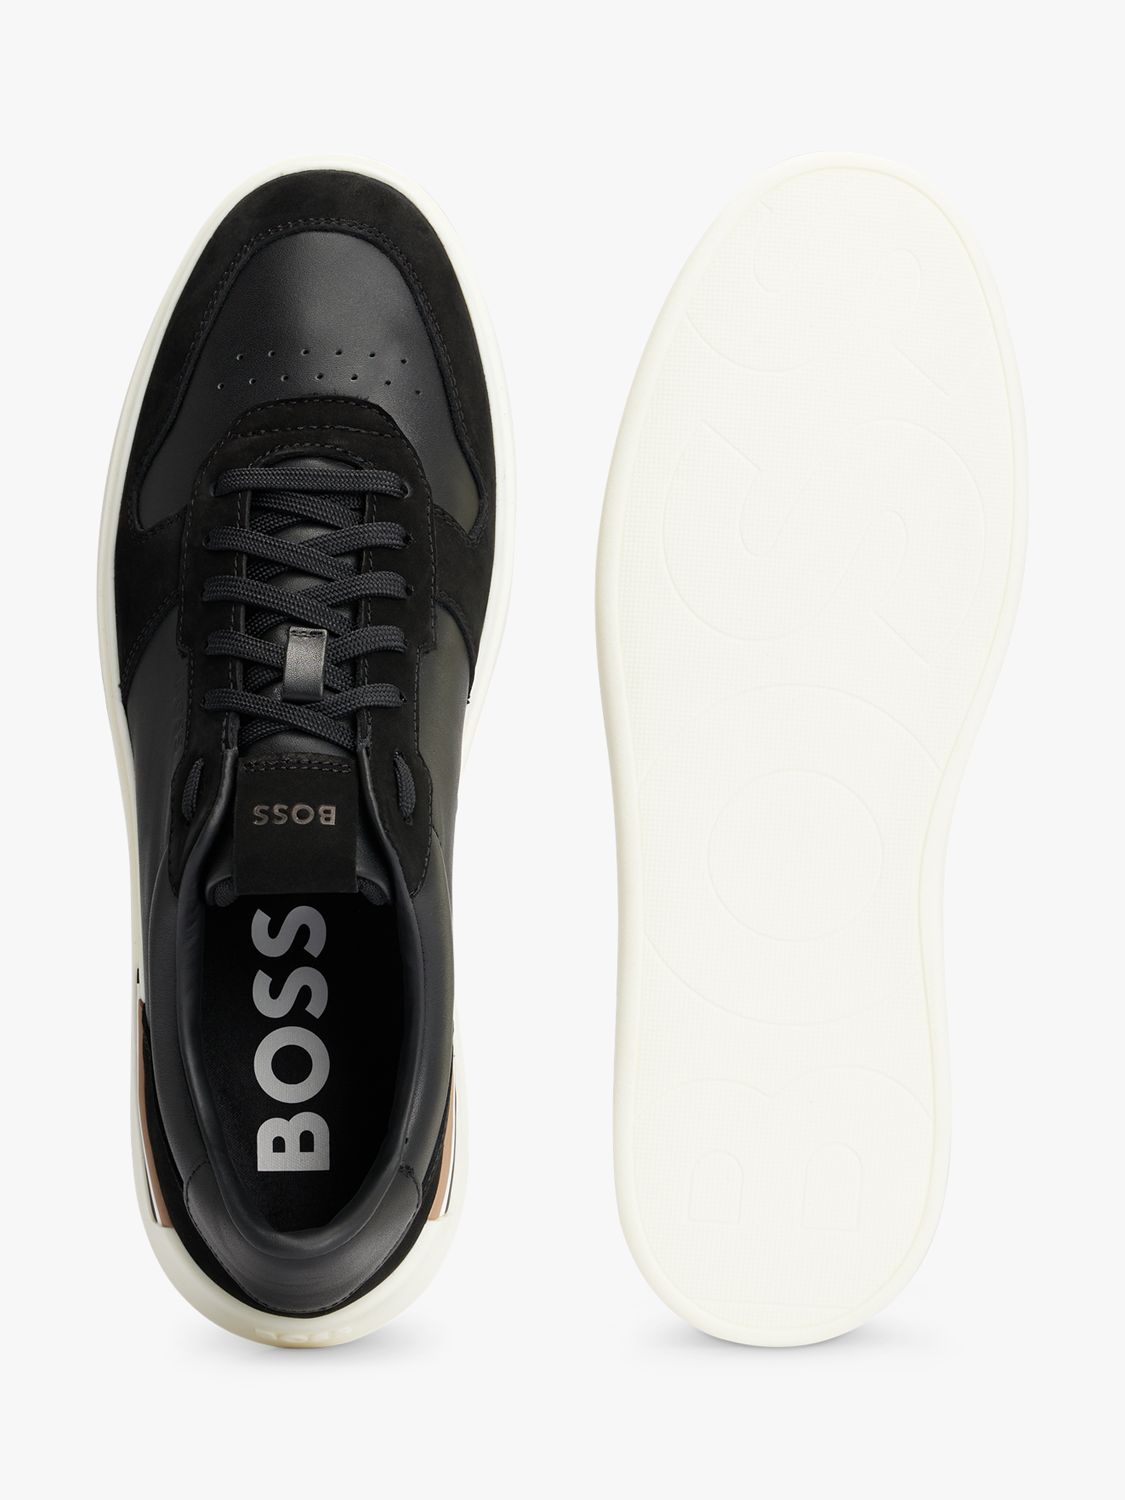 Buy BOSS Clint Basic Trainers, Black Online at johnlewis.com